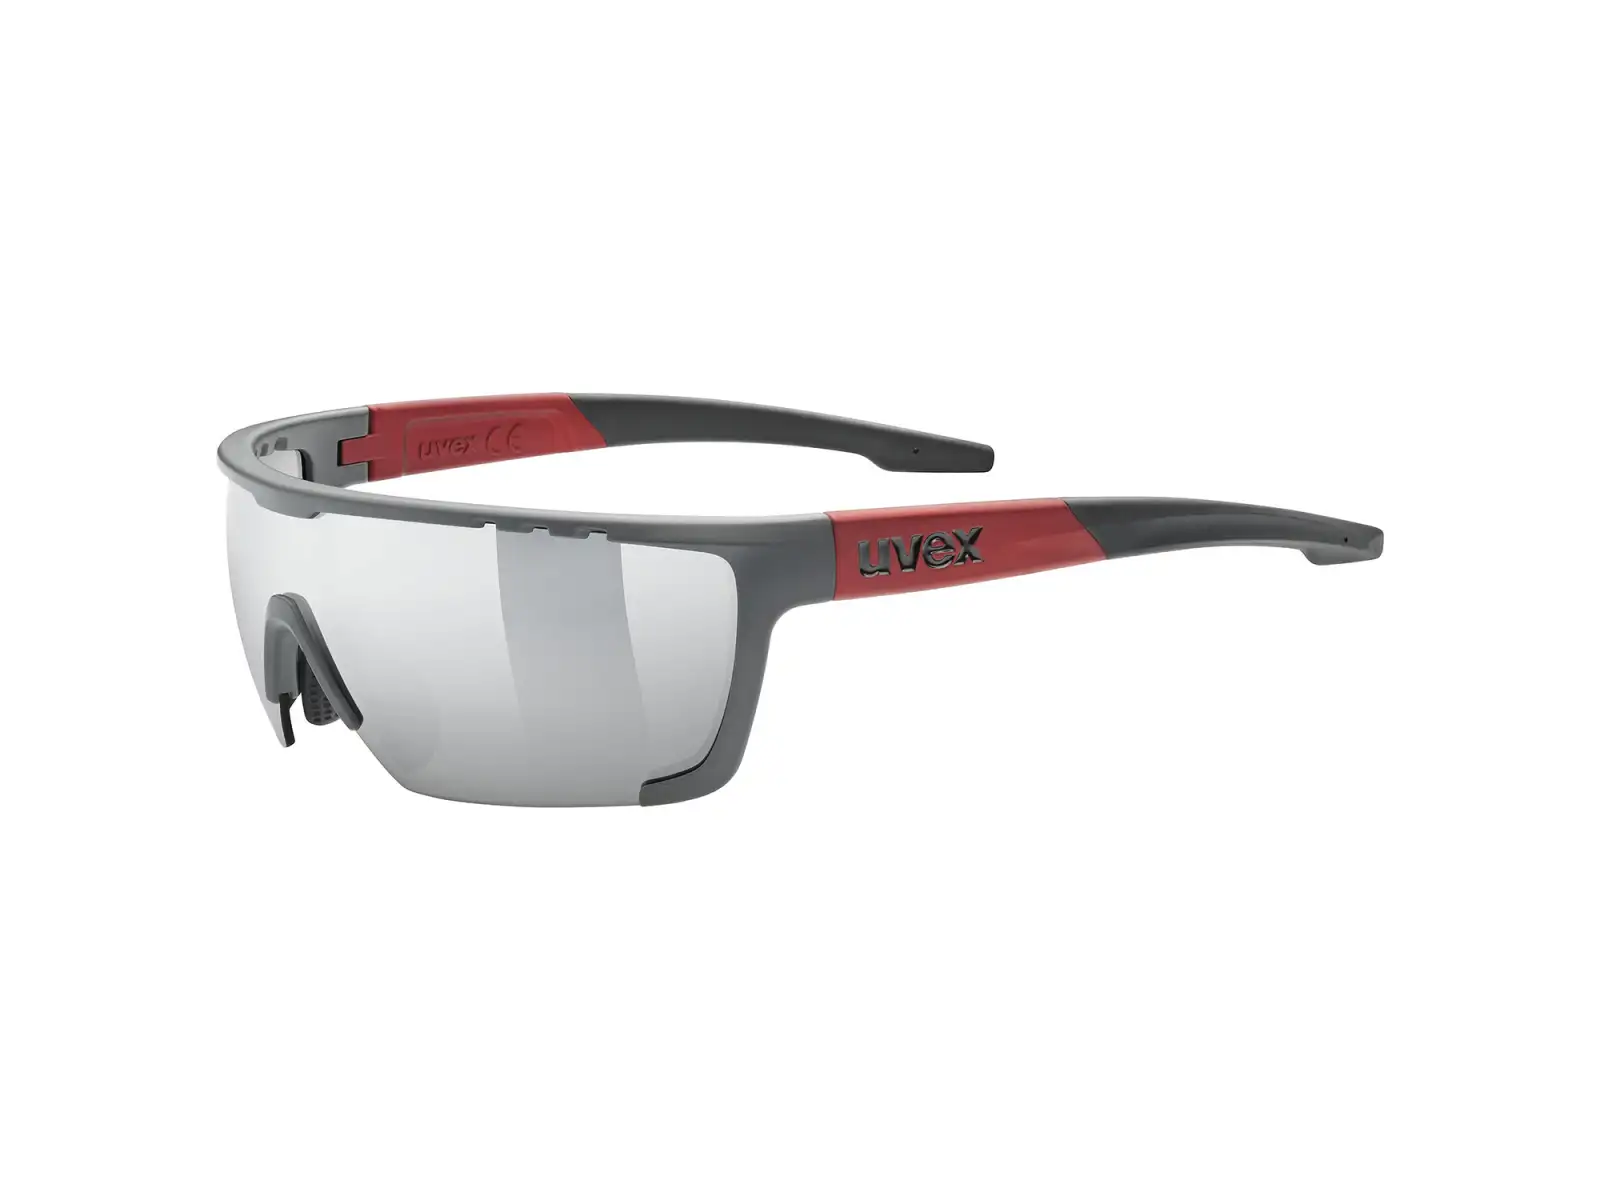 Uvex Sportstyle 707 brýle grey mat/red 2021